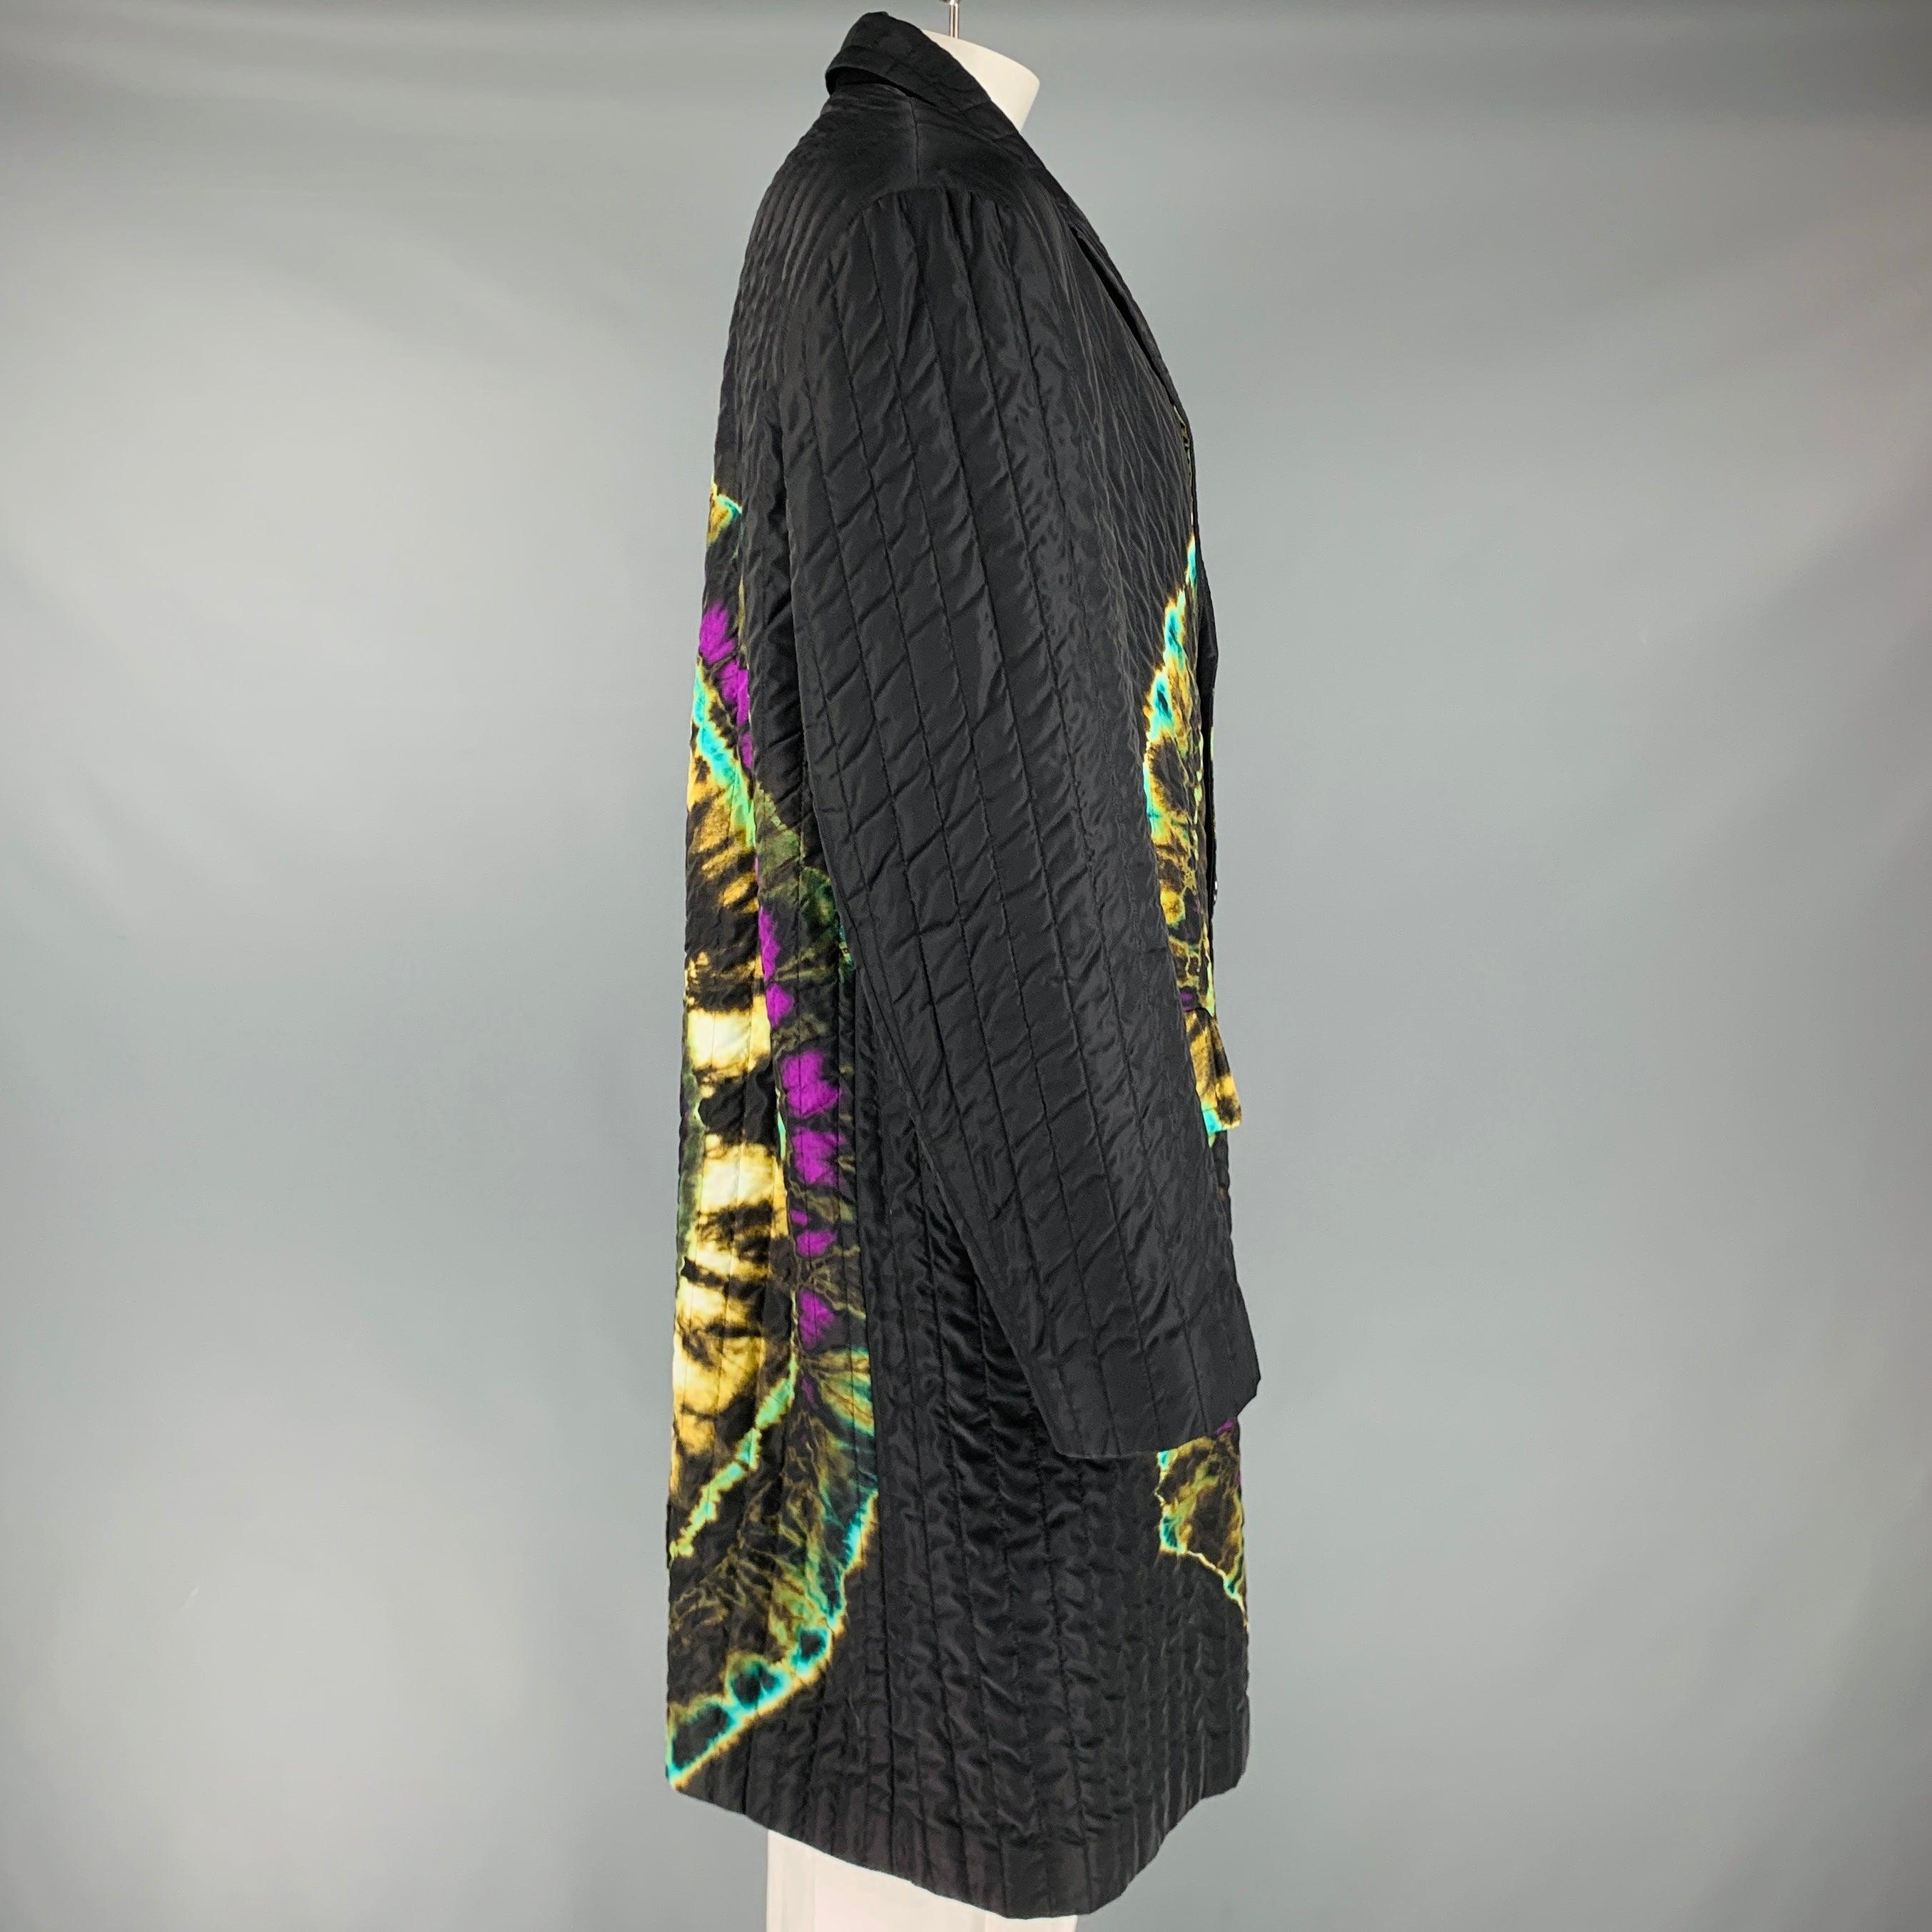 DRIES VAN NOTEN FW19 coat
in a
black polyamide blend featuring multi-color vibrant tie dye design, single breasted style, and three button closure. Made in Belgium.Excellent Pre-Owned Condition. 

Marked:   54 

Measurements: 
 
Shoulder: 20 inches